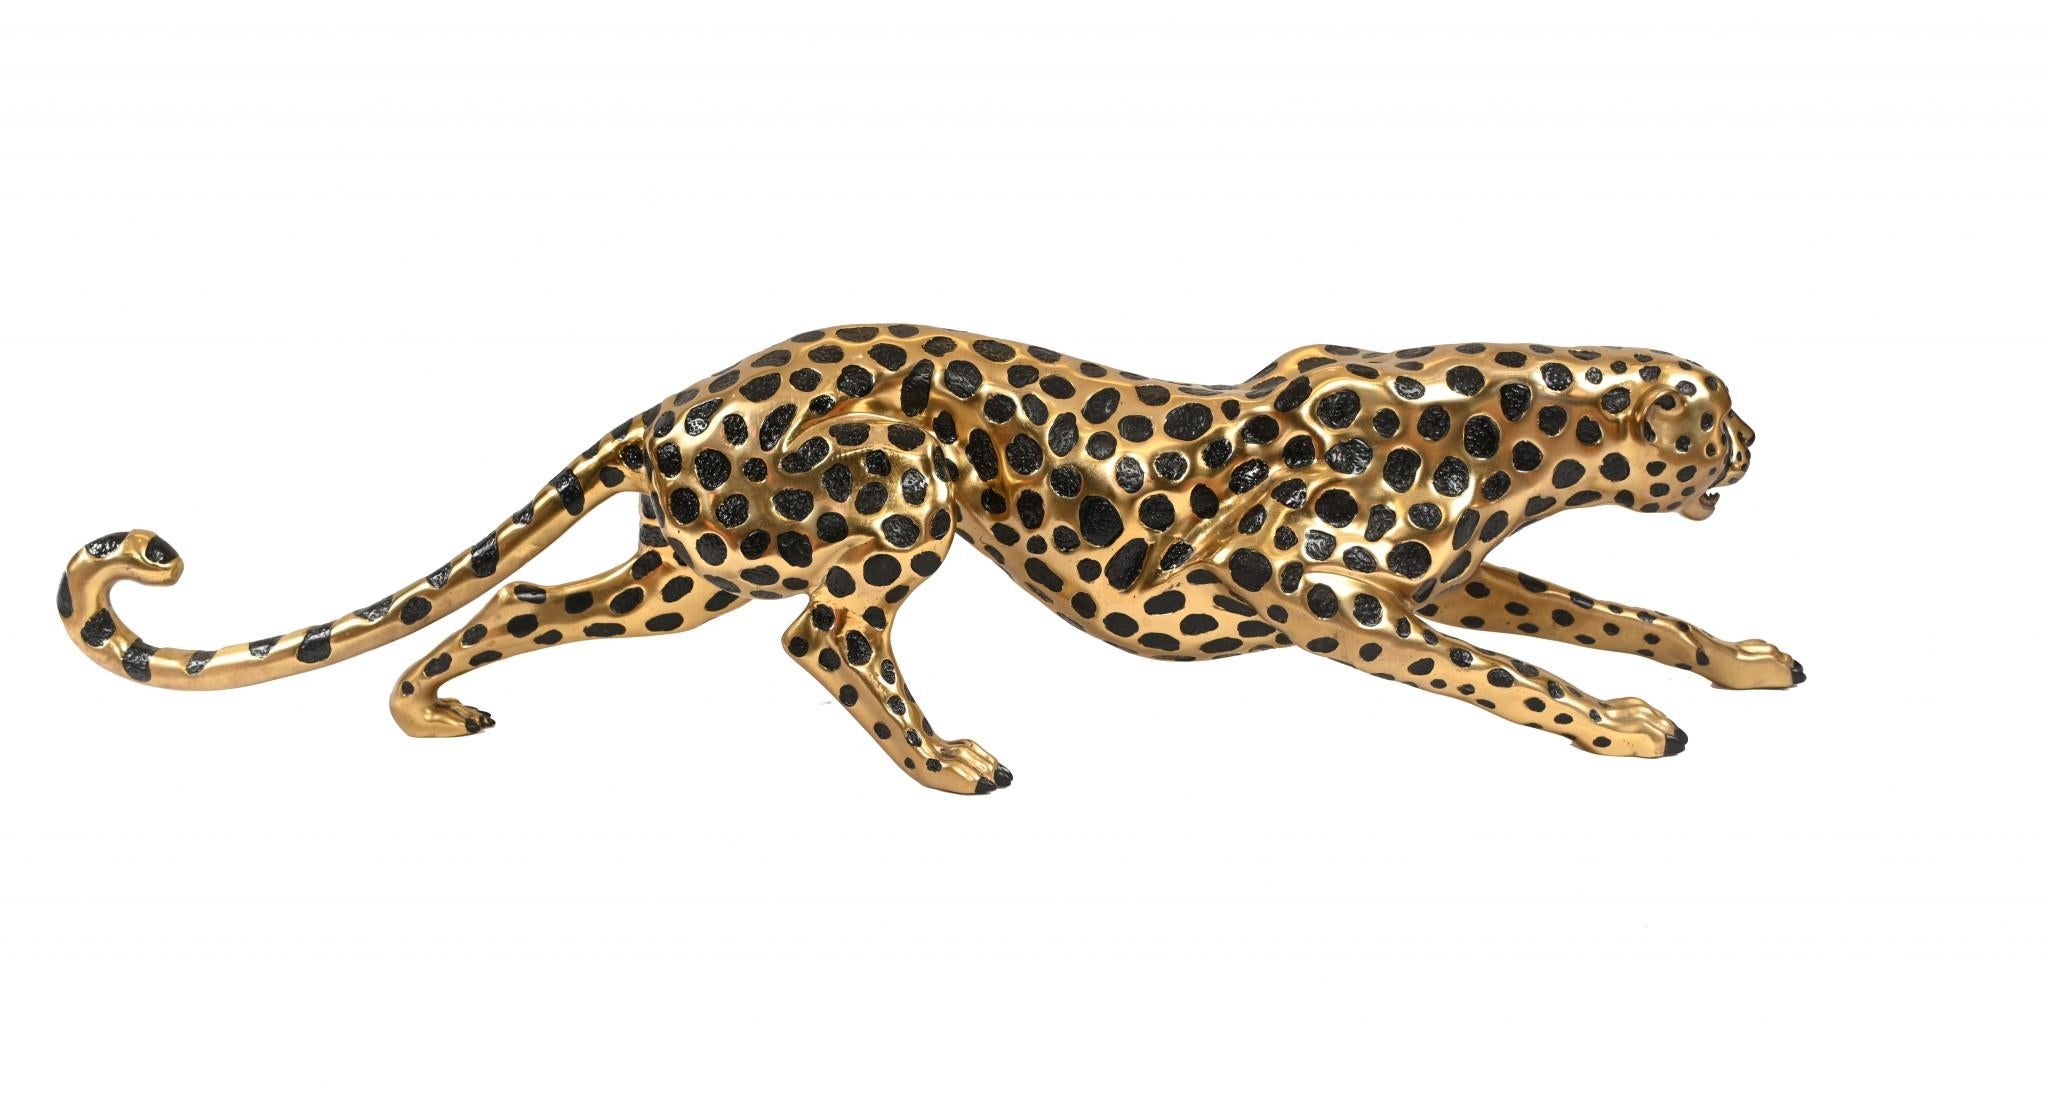 Gorgeous bronze casting of a large leopard in the Art Deco style
Good Size at almost four feet in length
Casting is superb, look at how the creatures spots have been rendered in black
Artist has really captured the beauty and poise to the